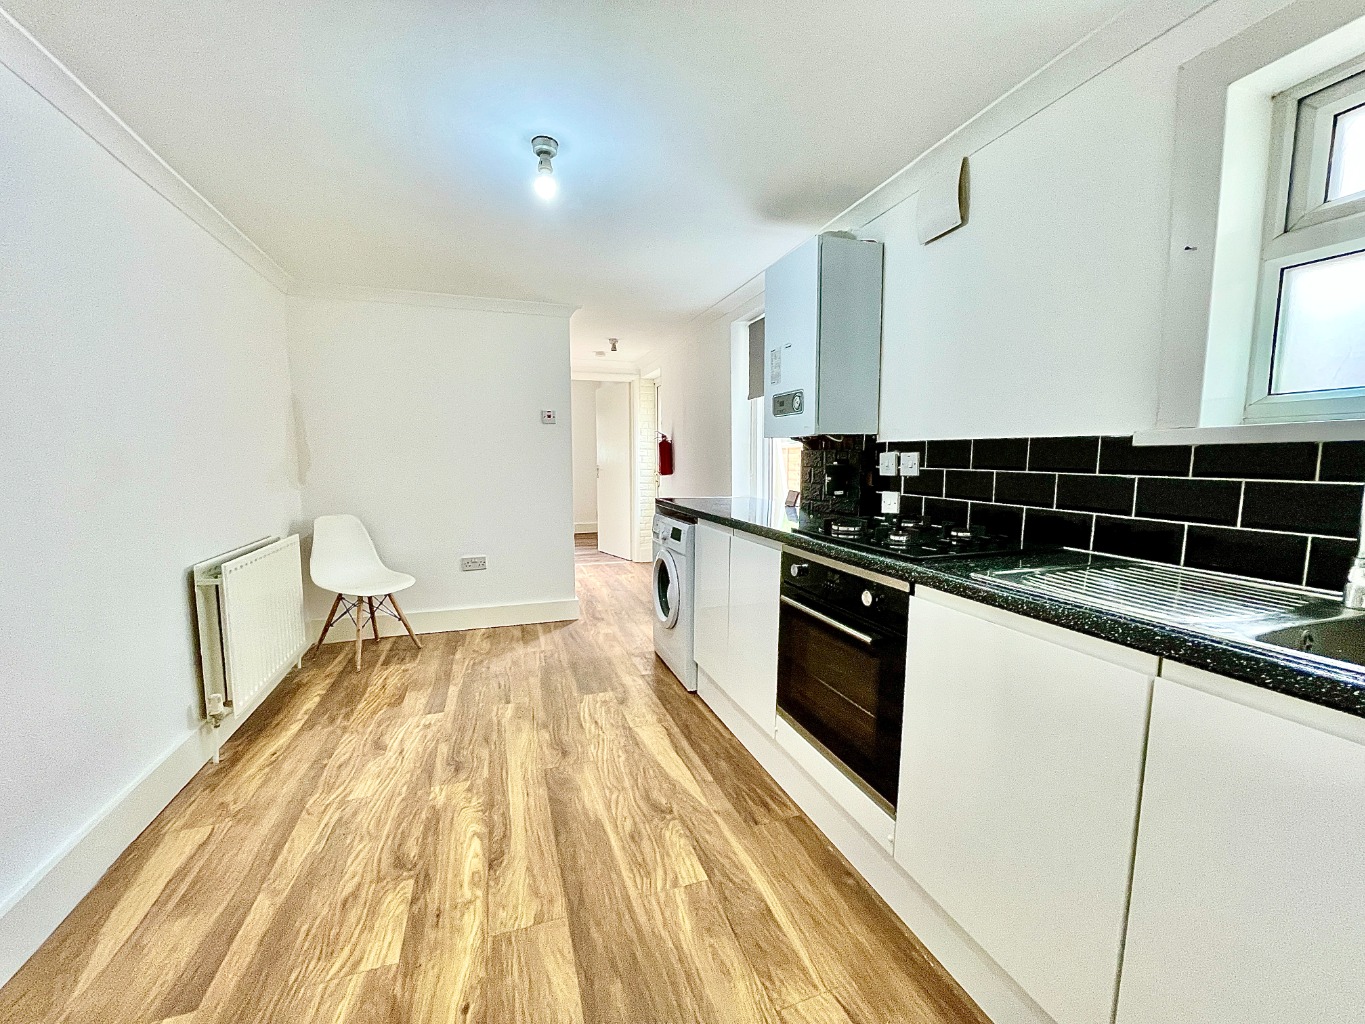 Beaumont Gibbs are offering this ground floor studio flat for rent in Burrage Place, Woolwich, SE18